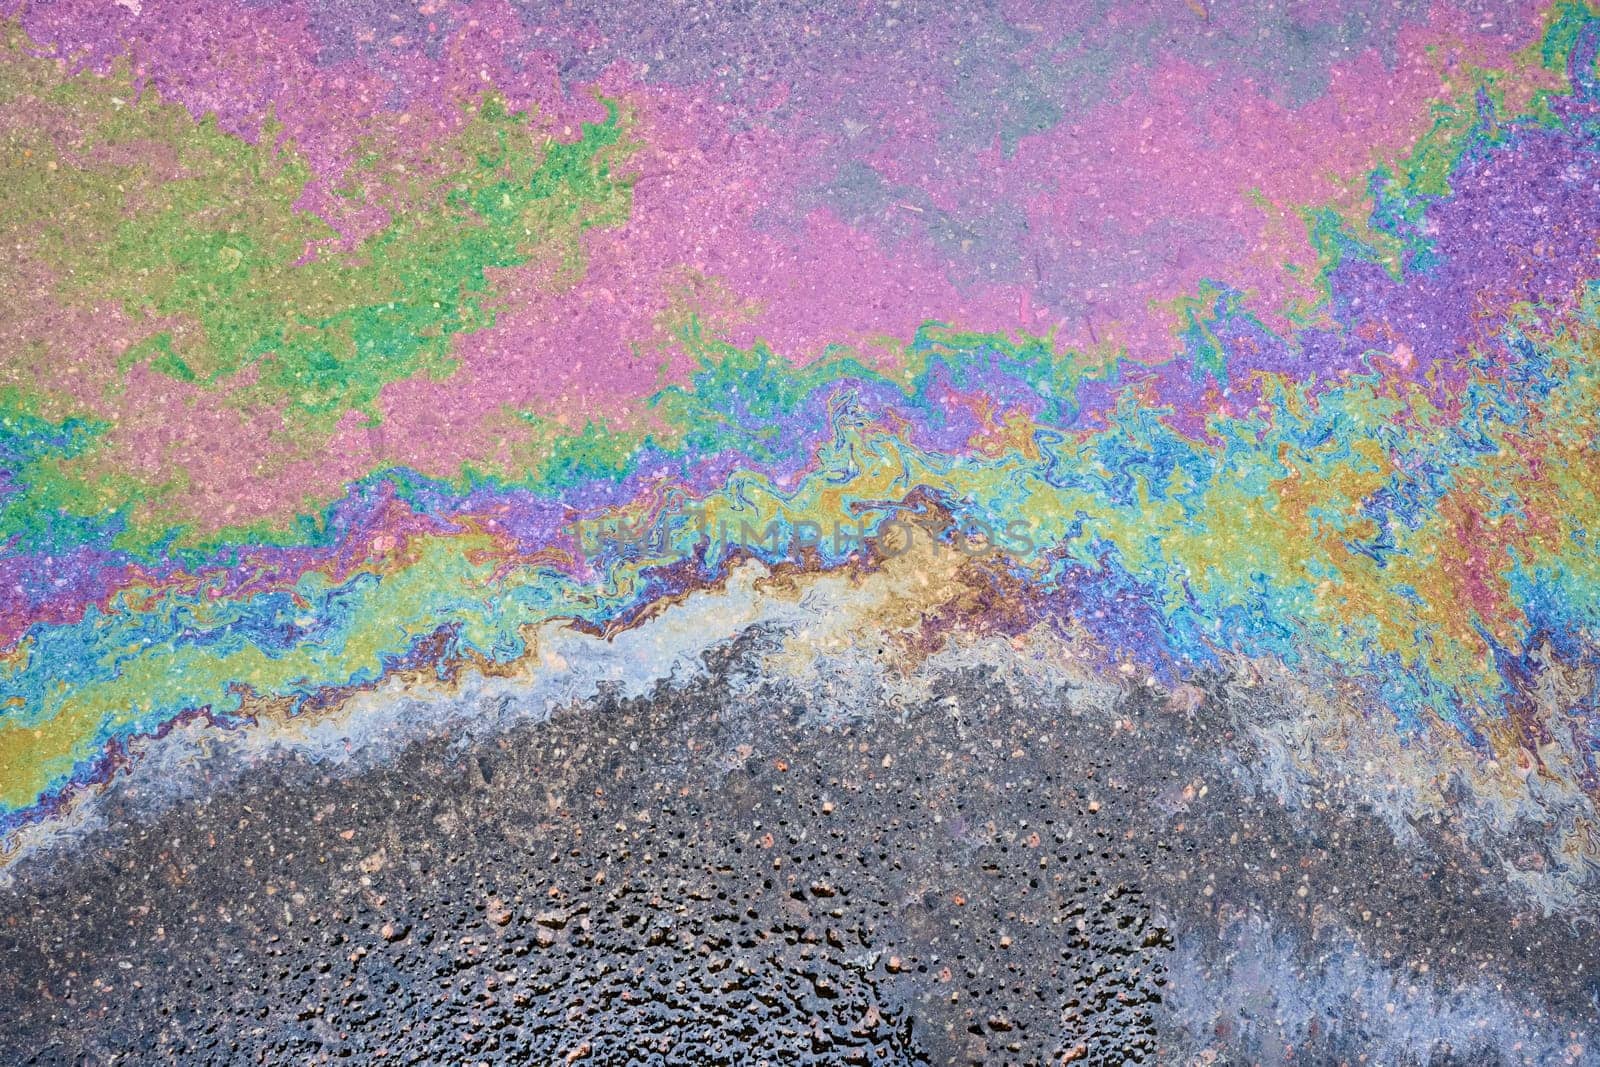 Captivating close-up of the opalescent sheen of a petrochemical spill on saturated asphalt. by AliaksandrFilimonau